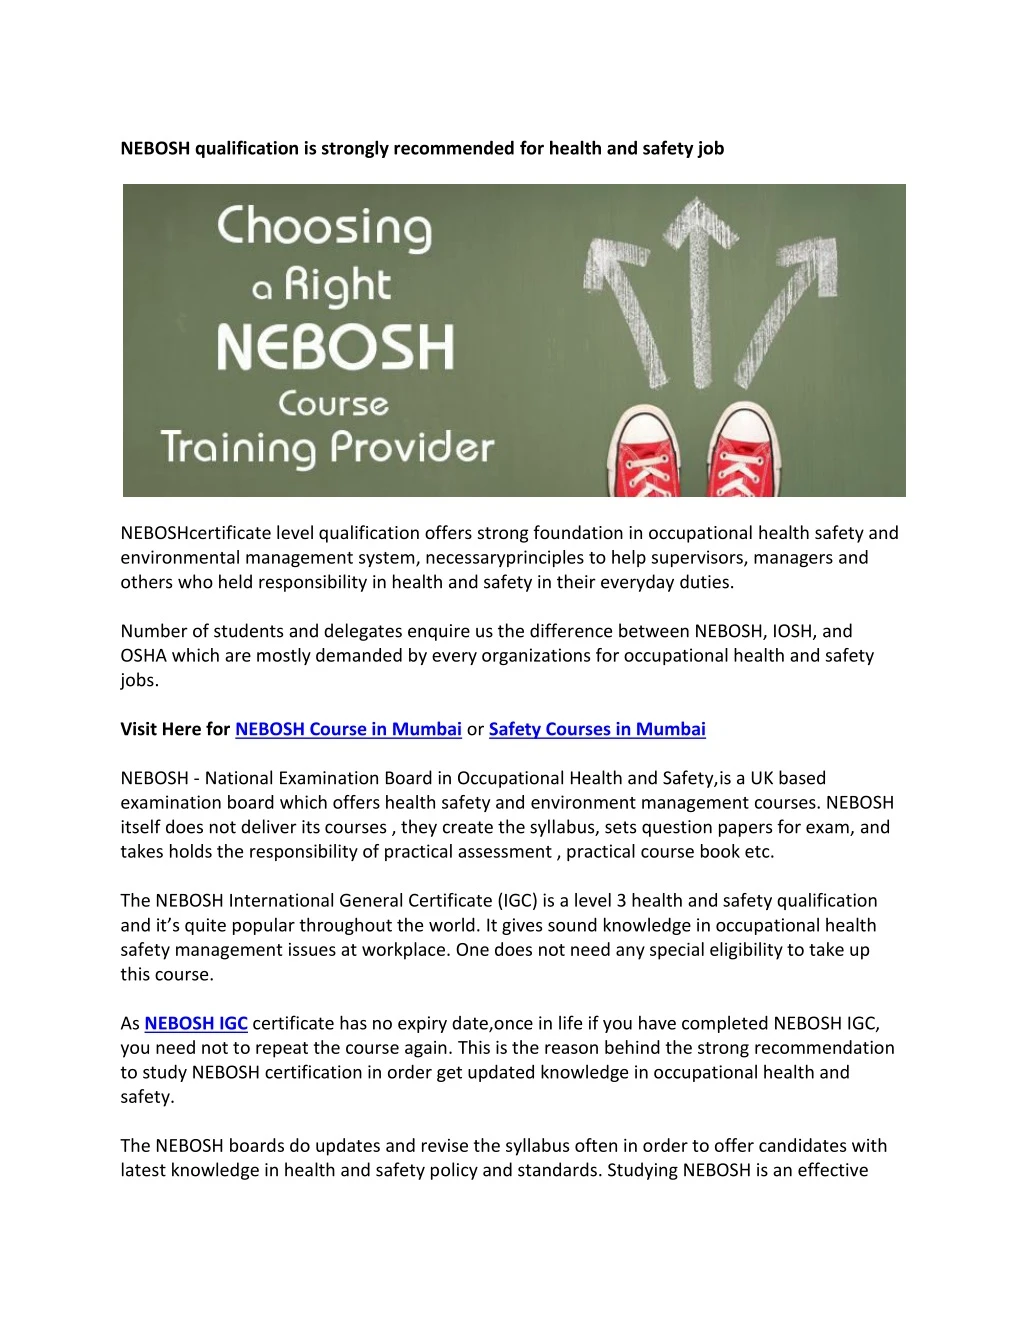 nebosh qualification is strongly recommended